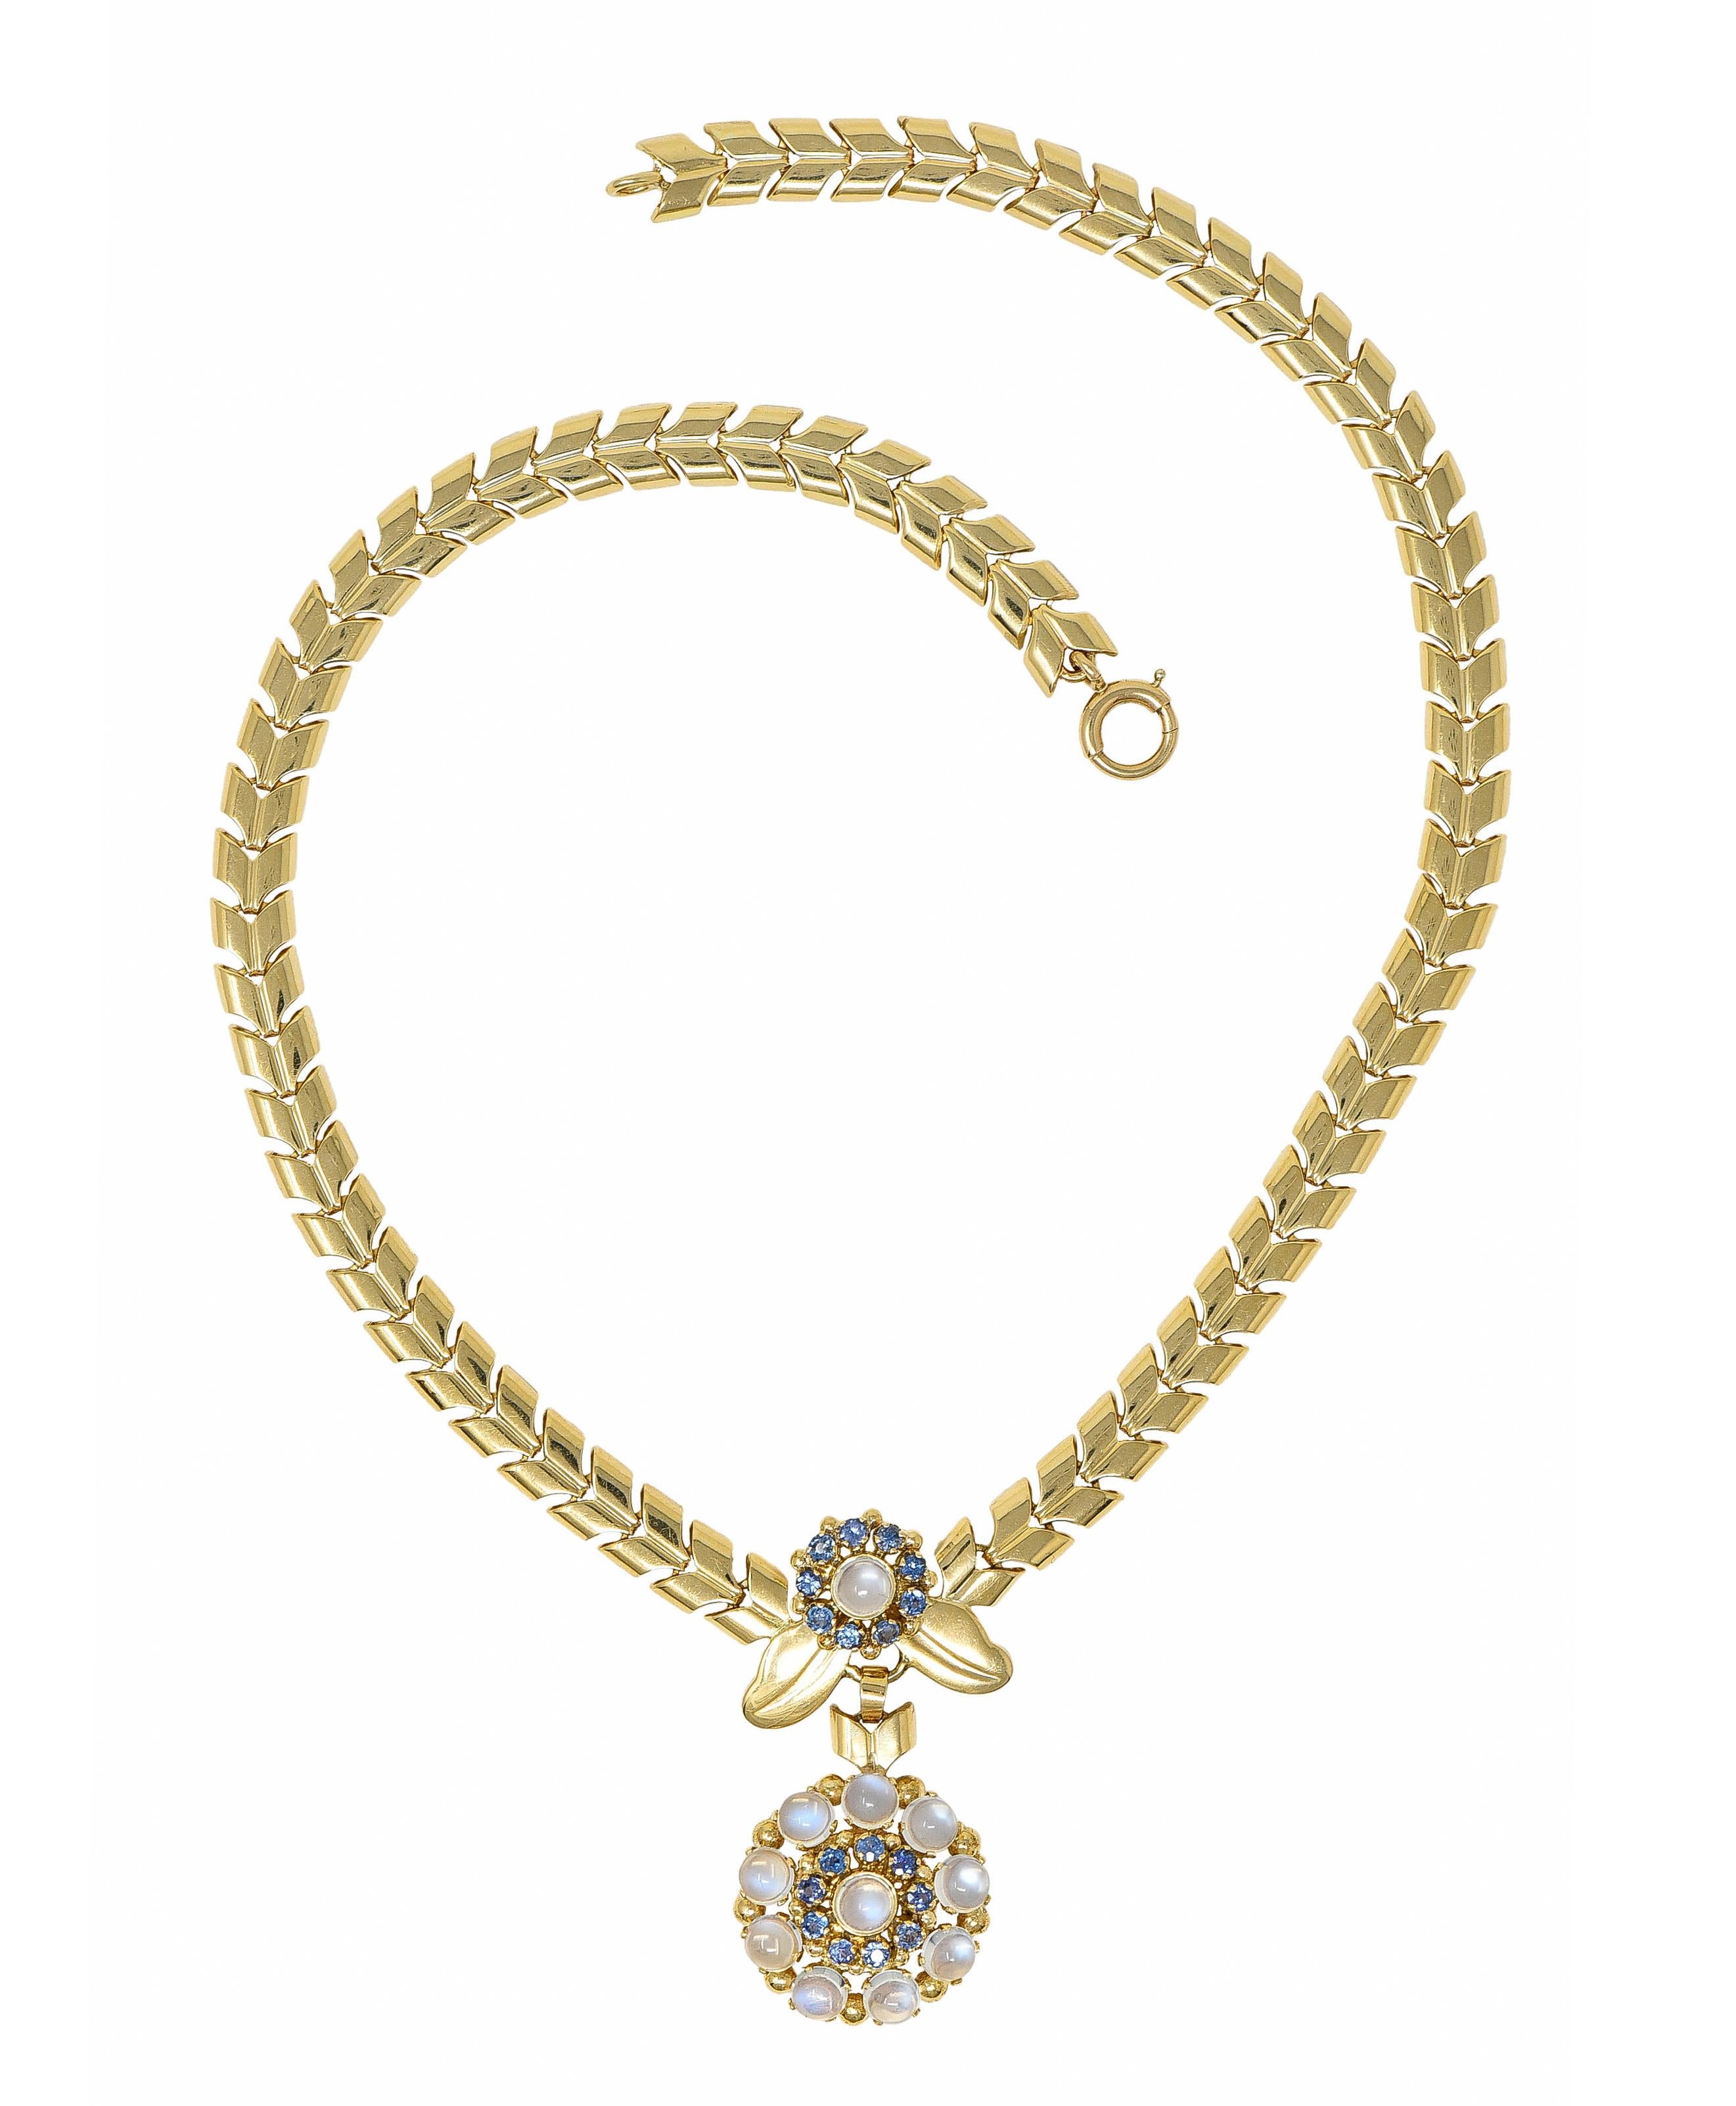 Necklace is comprised of polished chevron links terminating as a spring ring clasp

Featuring a center station comprised of two radiating floral clusters flanked by stylized gold foliate

With 4.5 mm round moonstone cabochons - translucent with